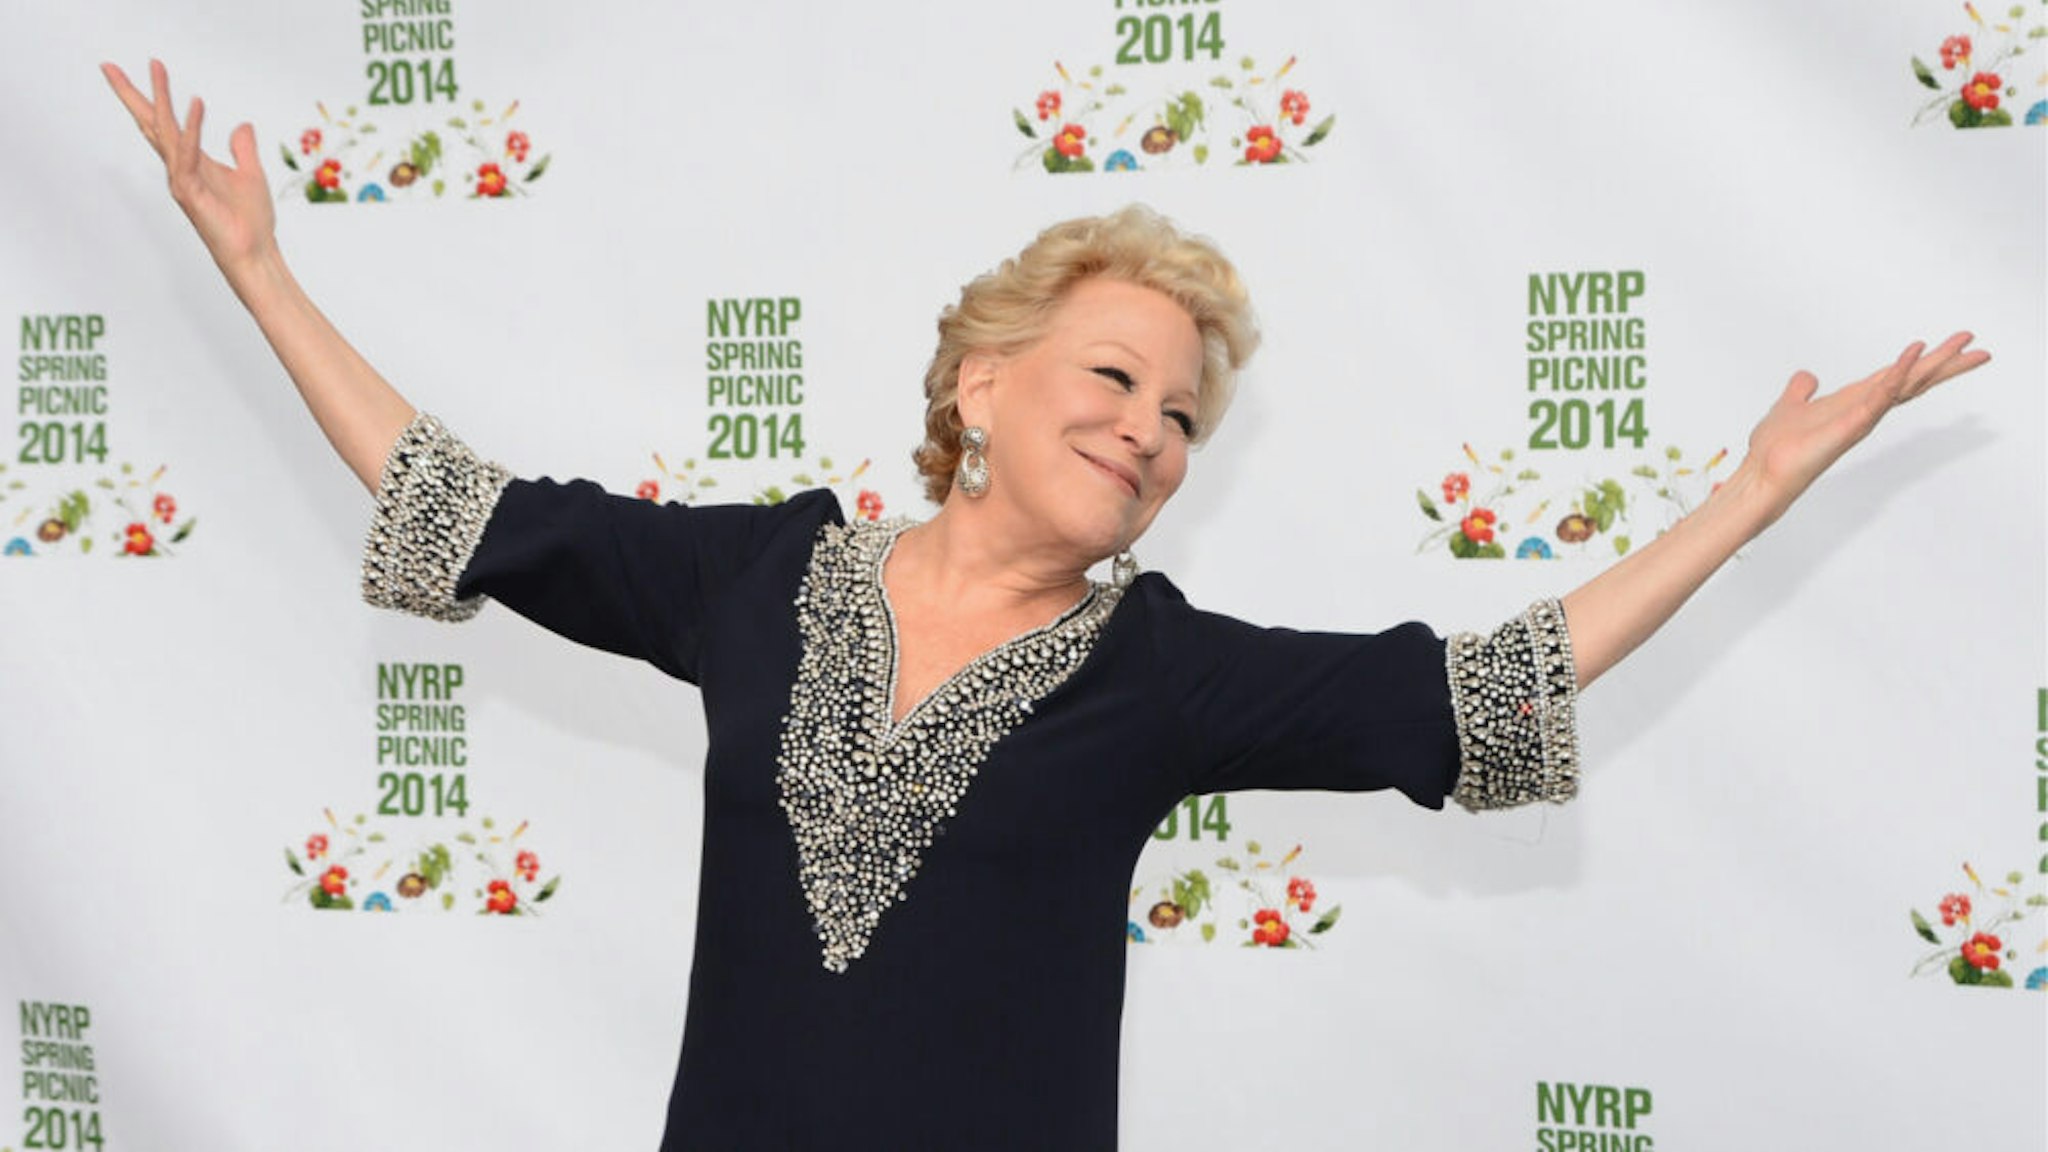 Bette Midler attends the 13th annual New York Restoration Project Annual Spring Picnic at General Grant National Memorial on May 29, 2014 in New York City.